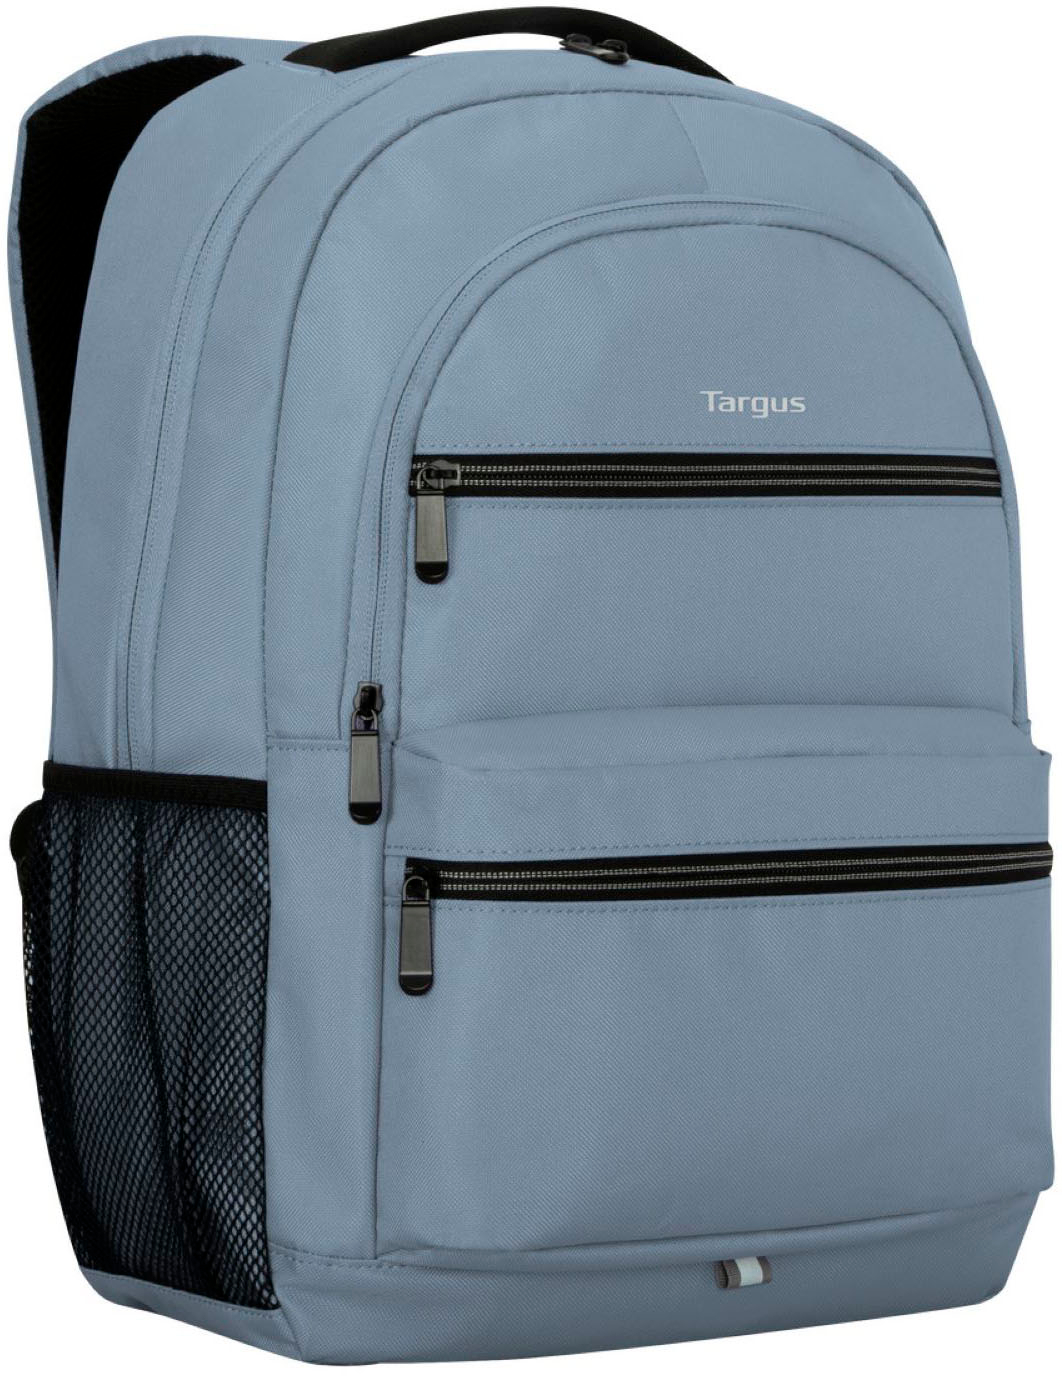 Angle View: Targus - Sleeve for 14" Laptop - Black